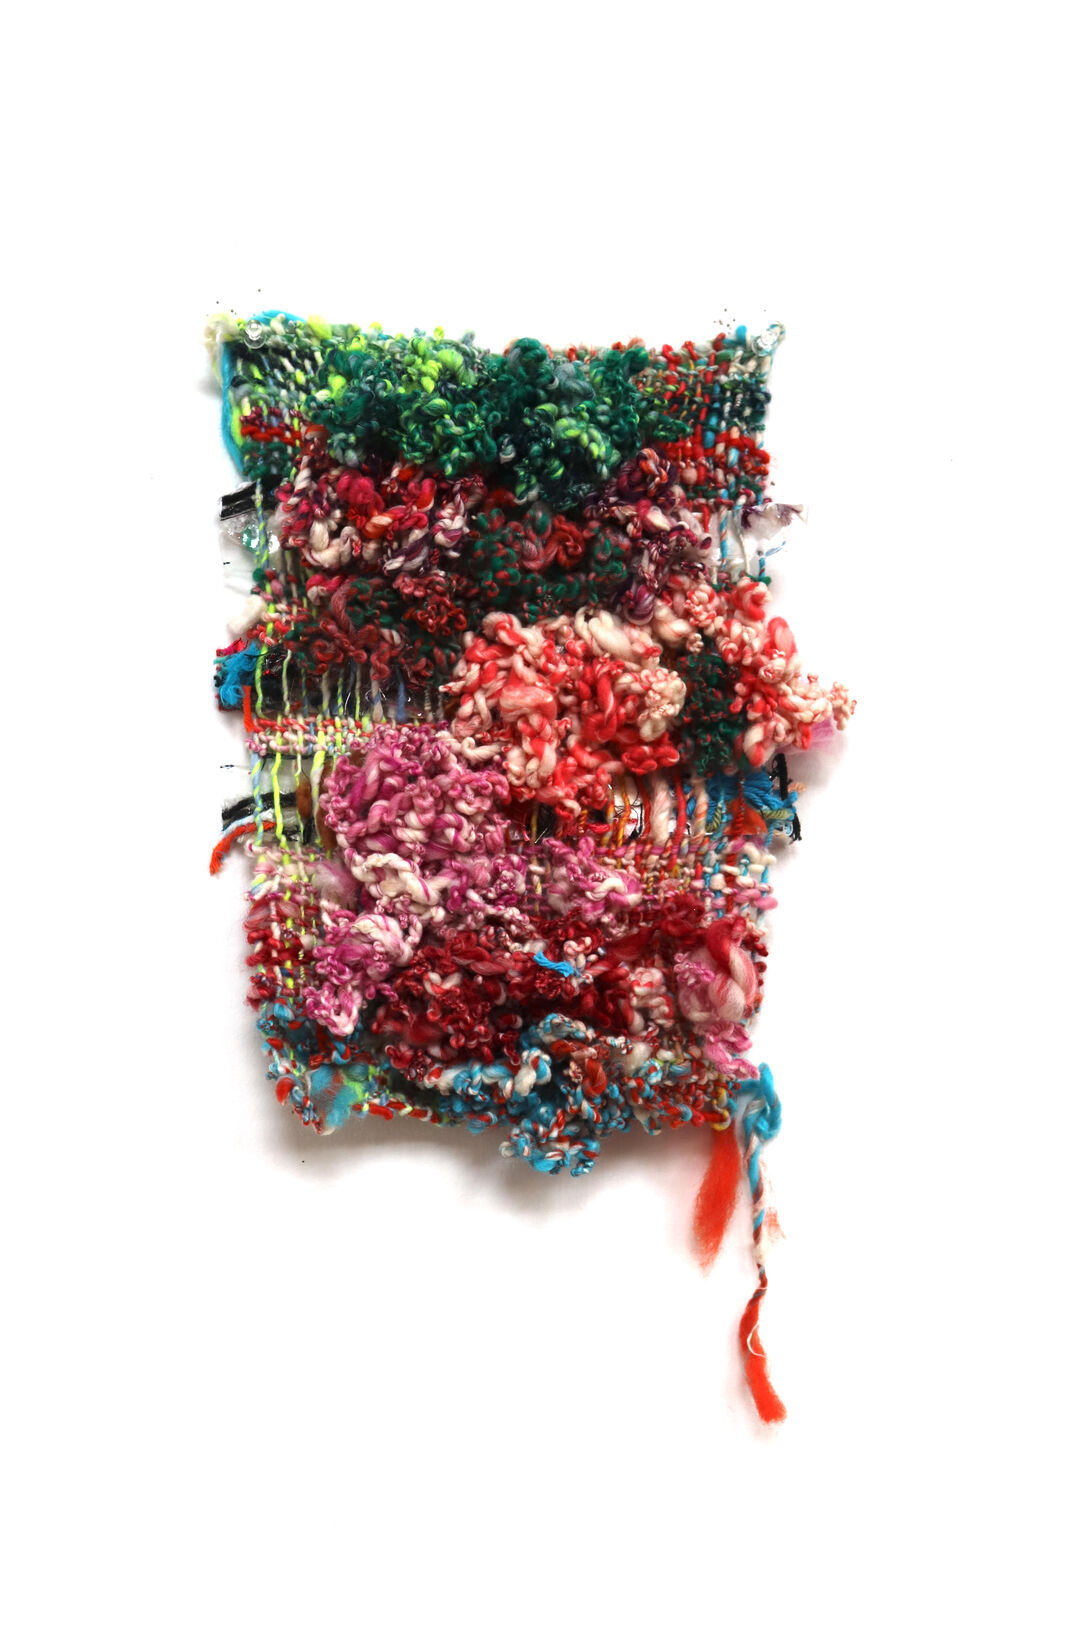 A piece of brightly colored, knit fiber art on a white background